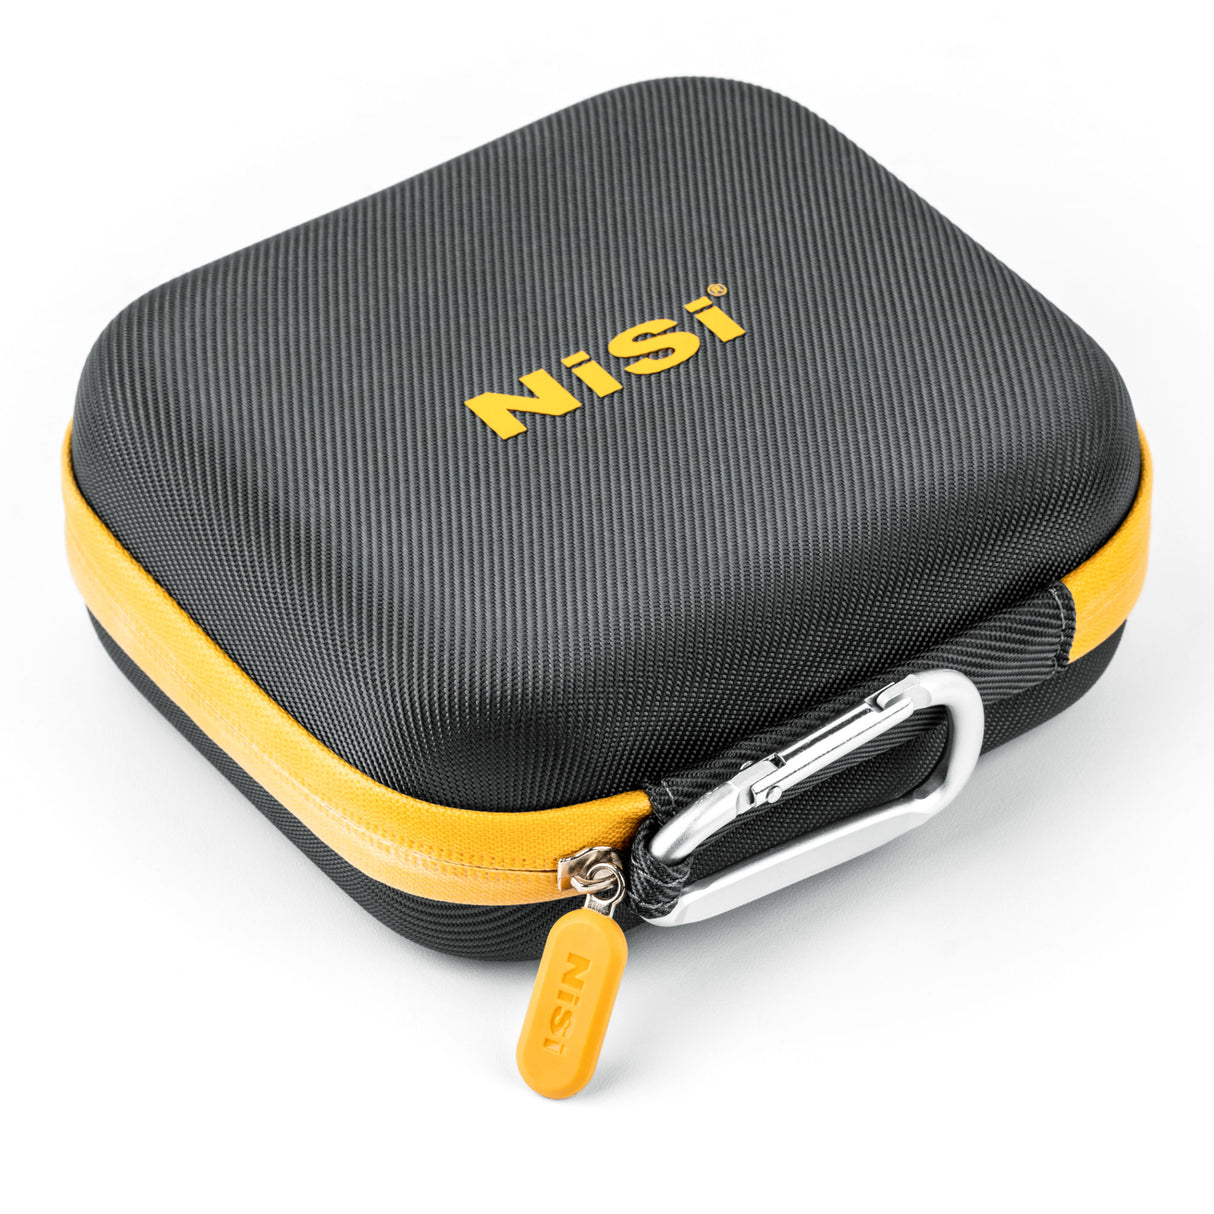 NiSi Caddy II Circular Filter Pouch for 8 Filters